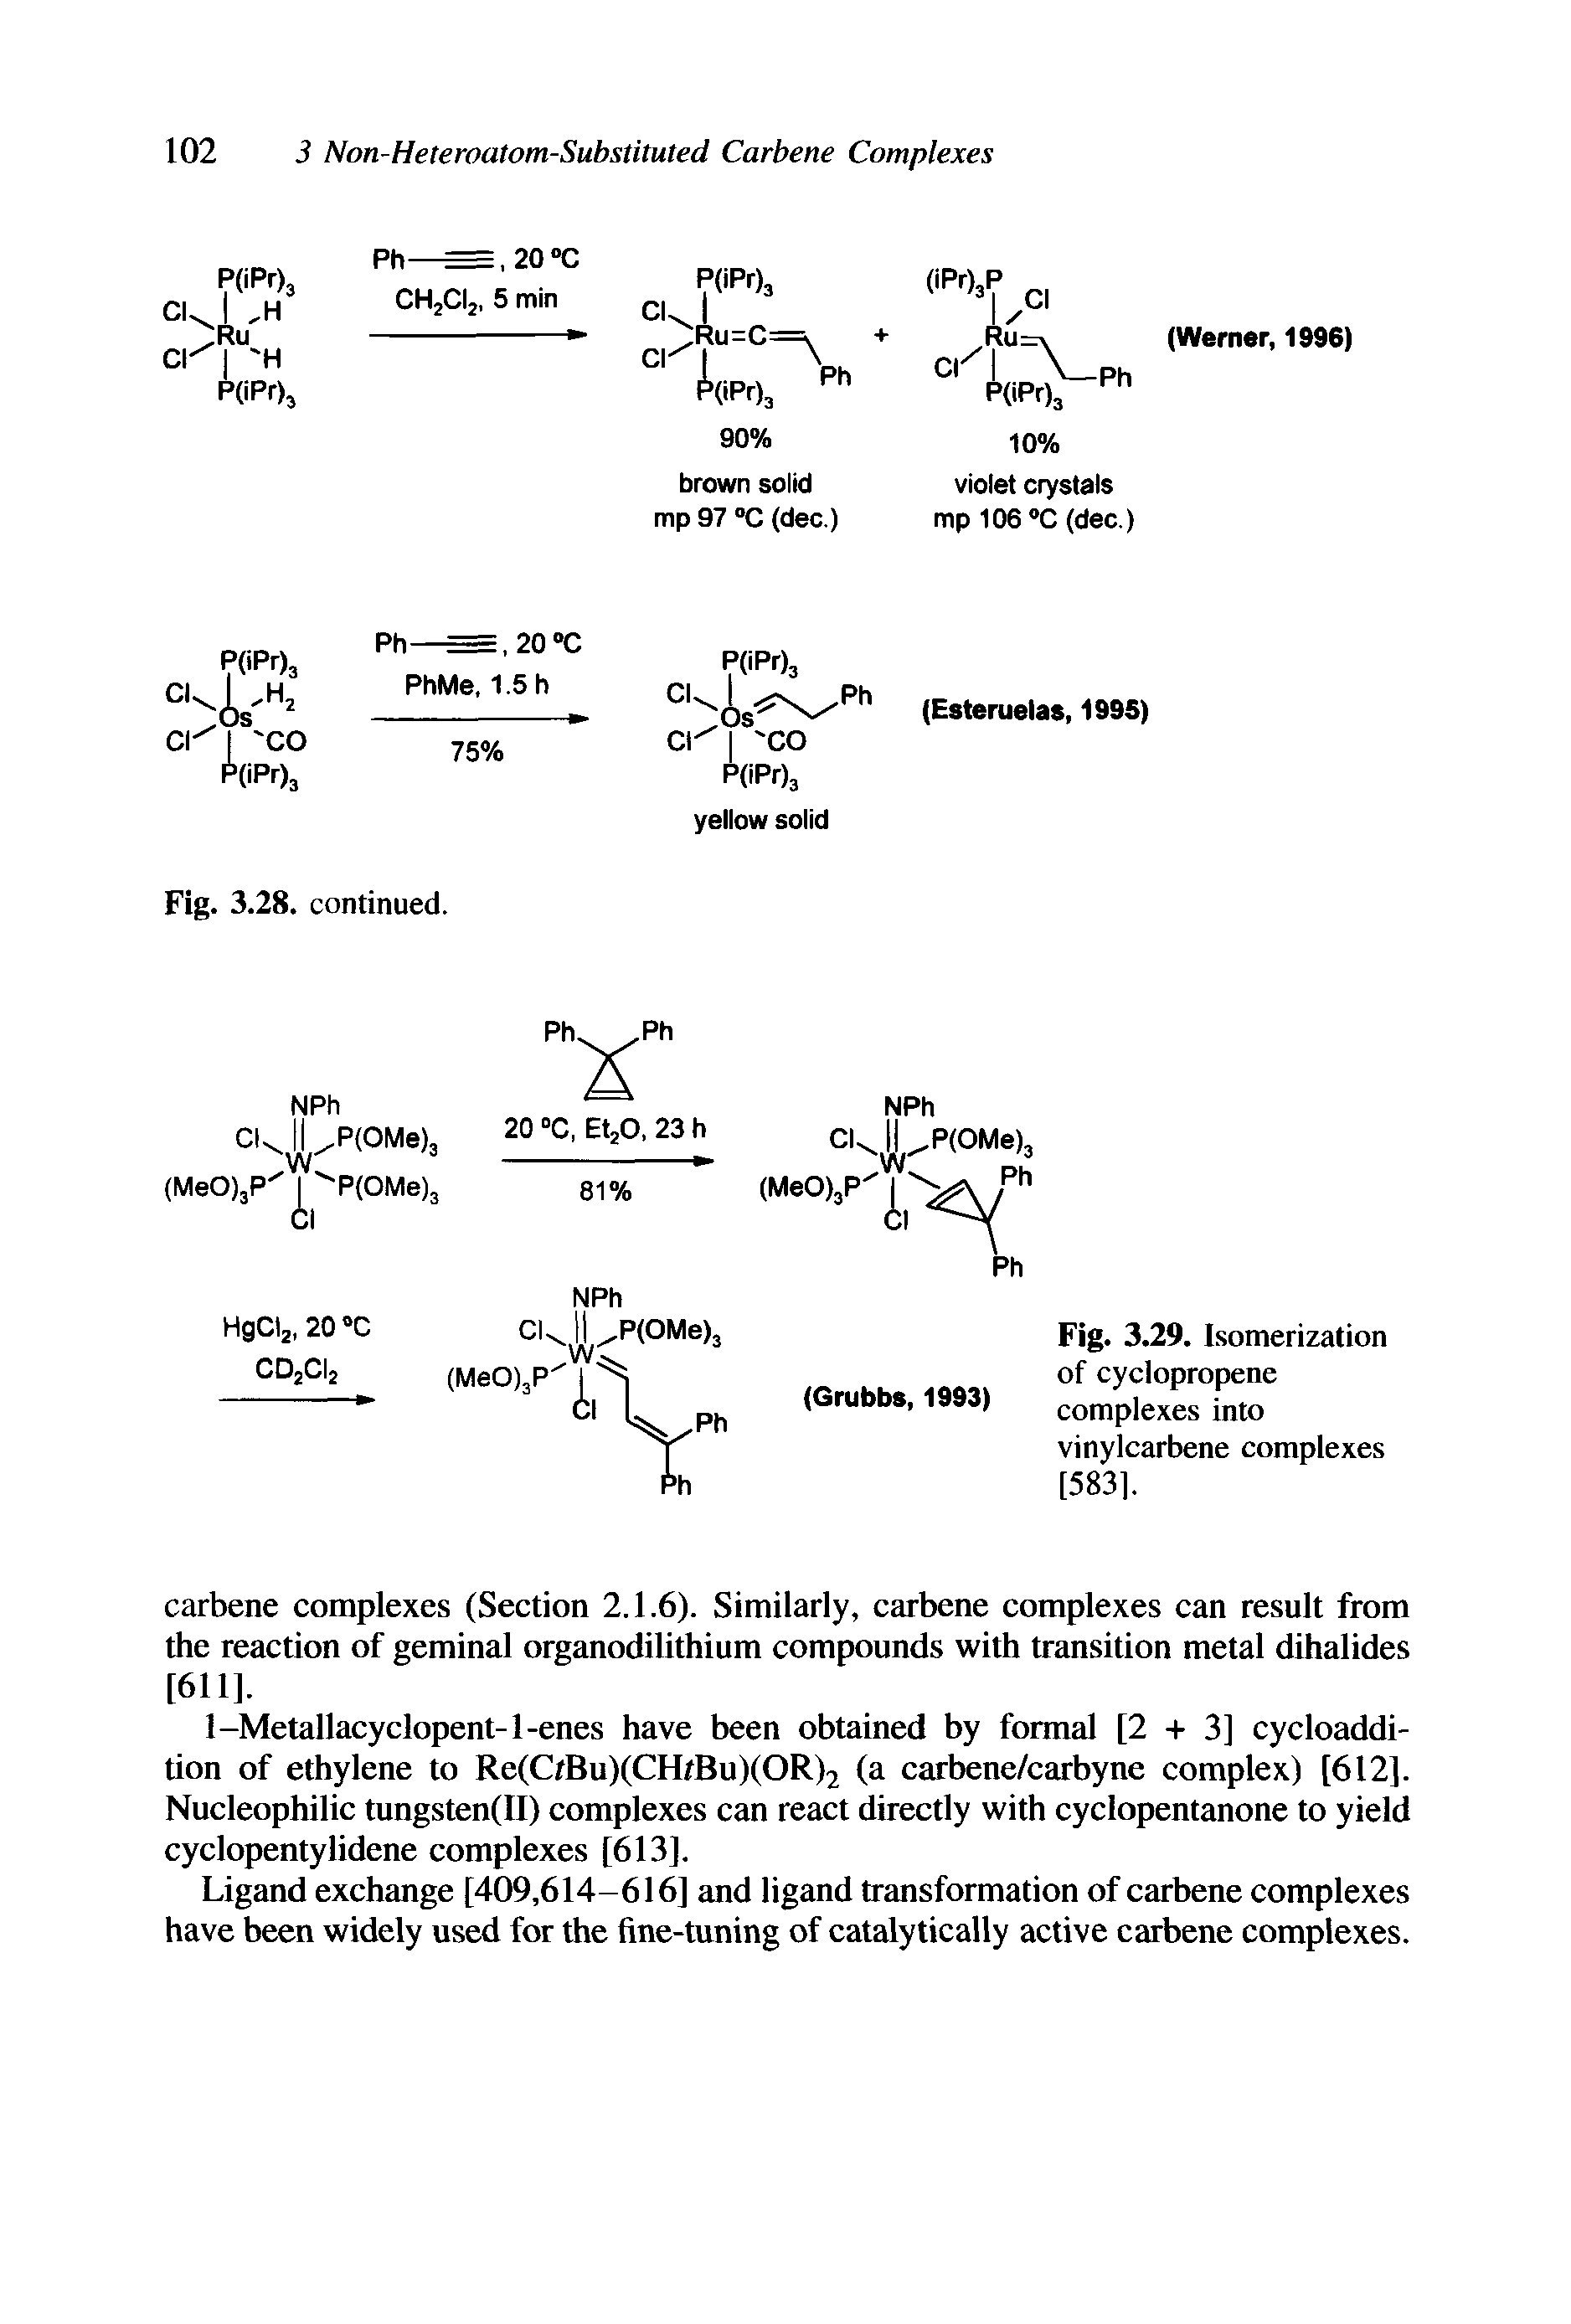 Fig. 3.29. Isomerization of cyclopropene complexes into vinylcarbene complexes [5831.